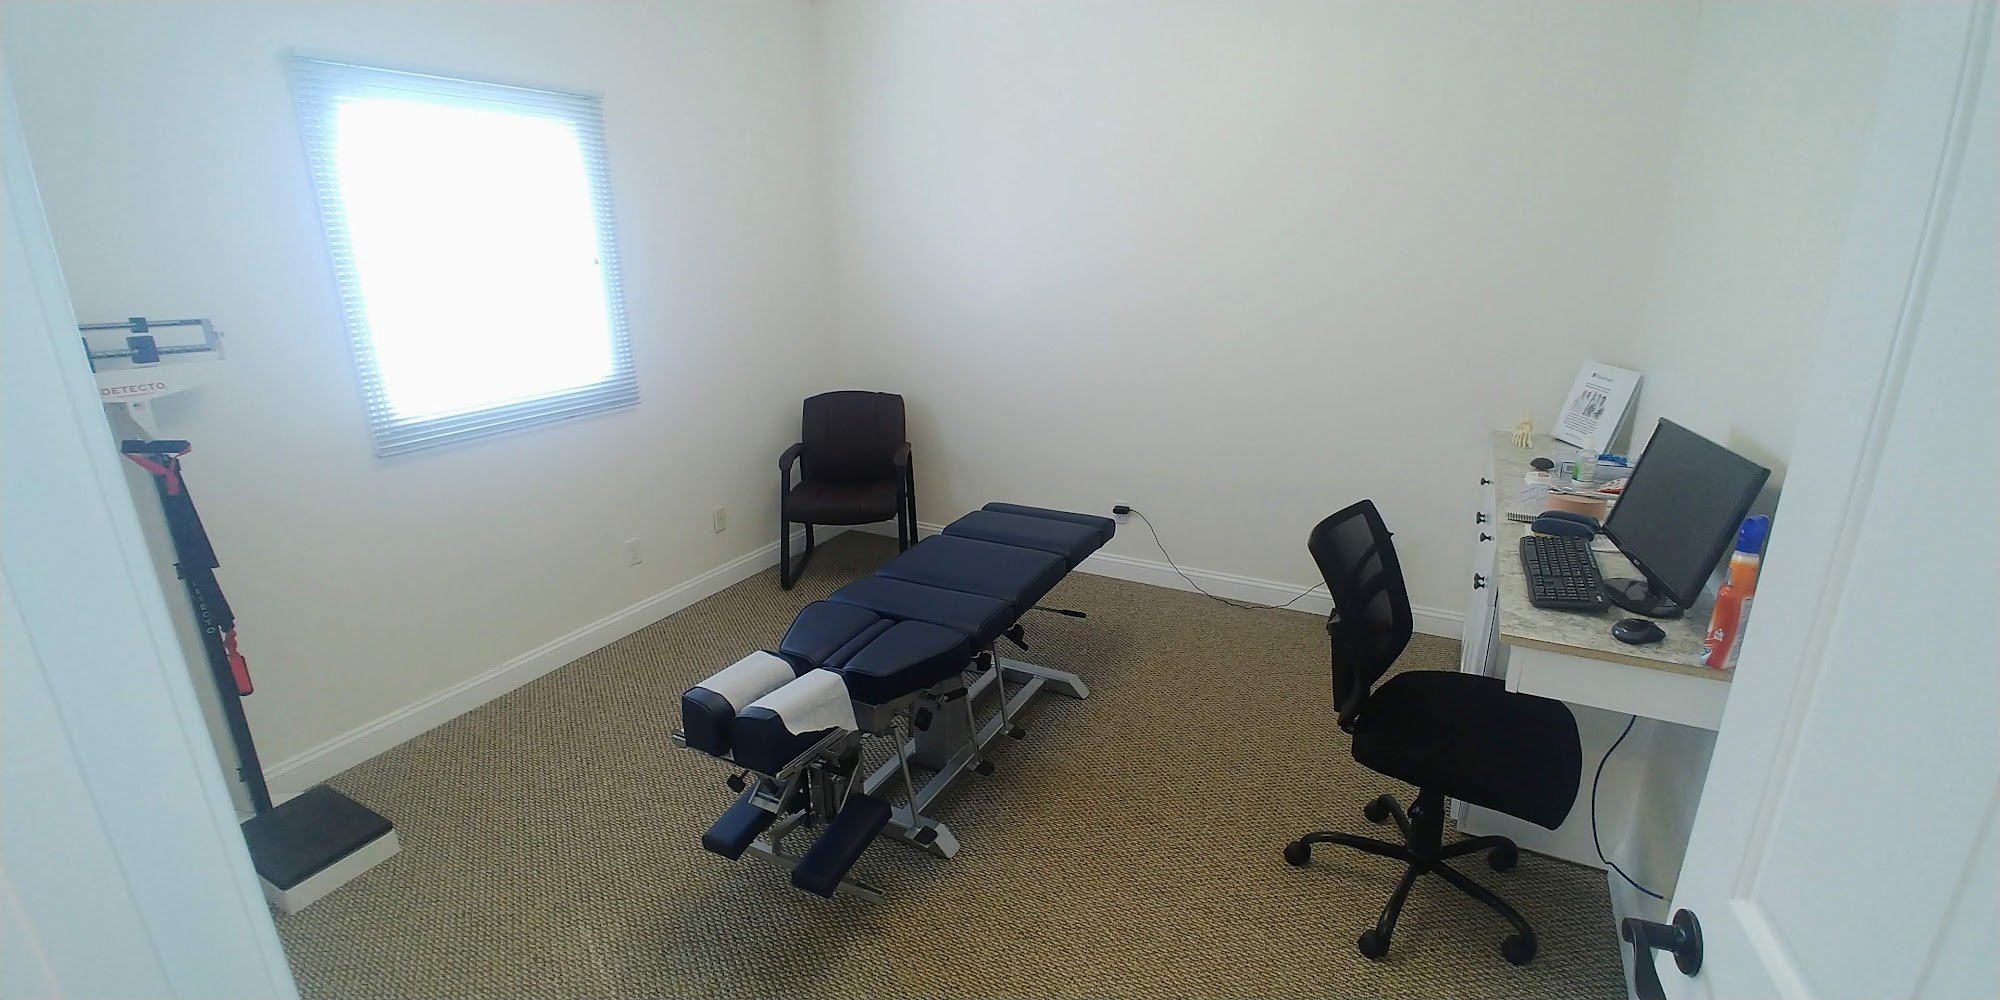 Scoresby Chiropractic 2677 E 17th St Suite 500, Ammon Idaho 83406